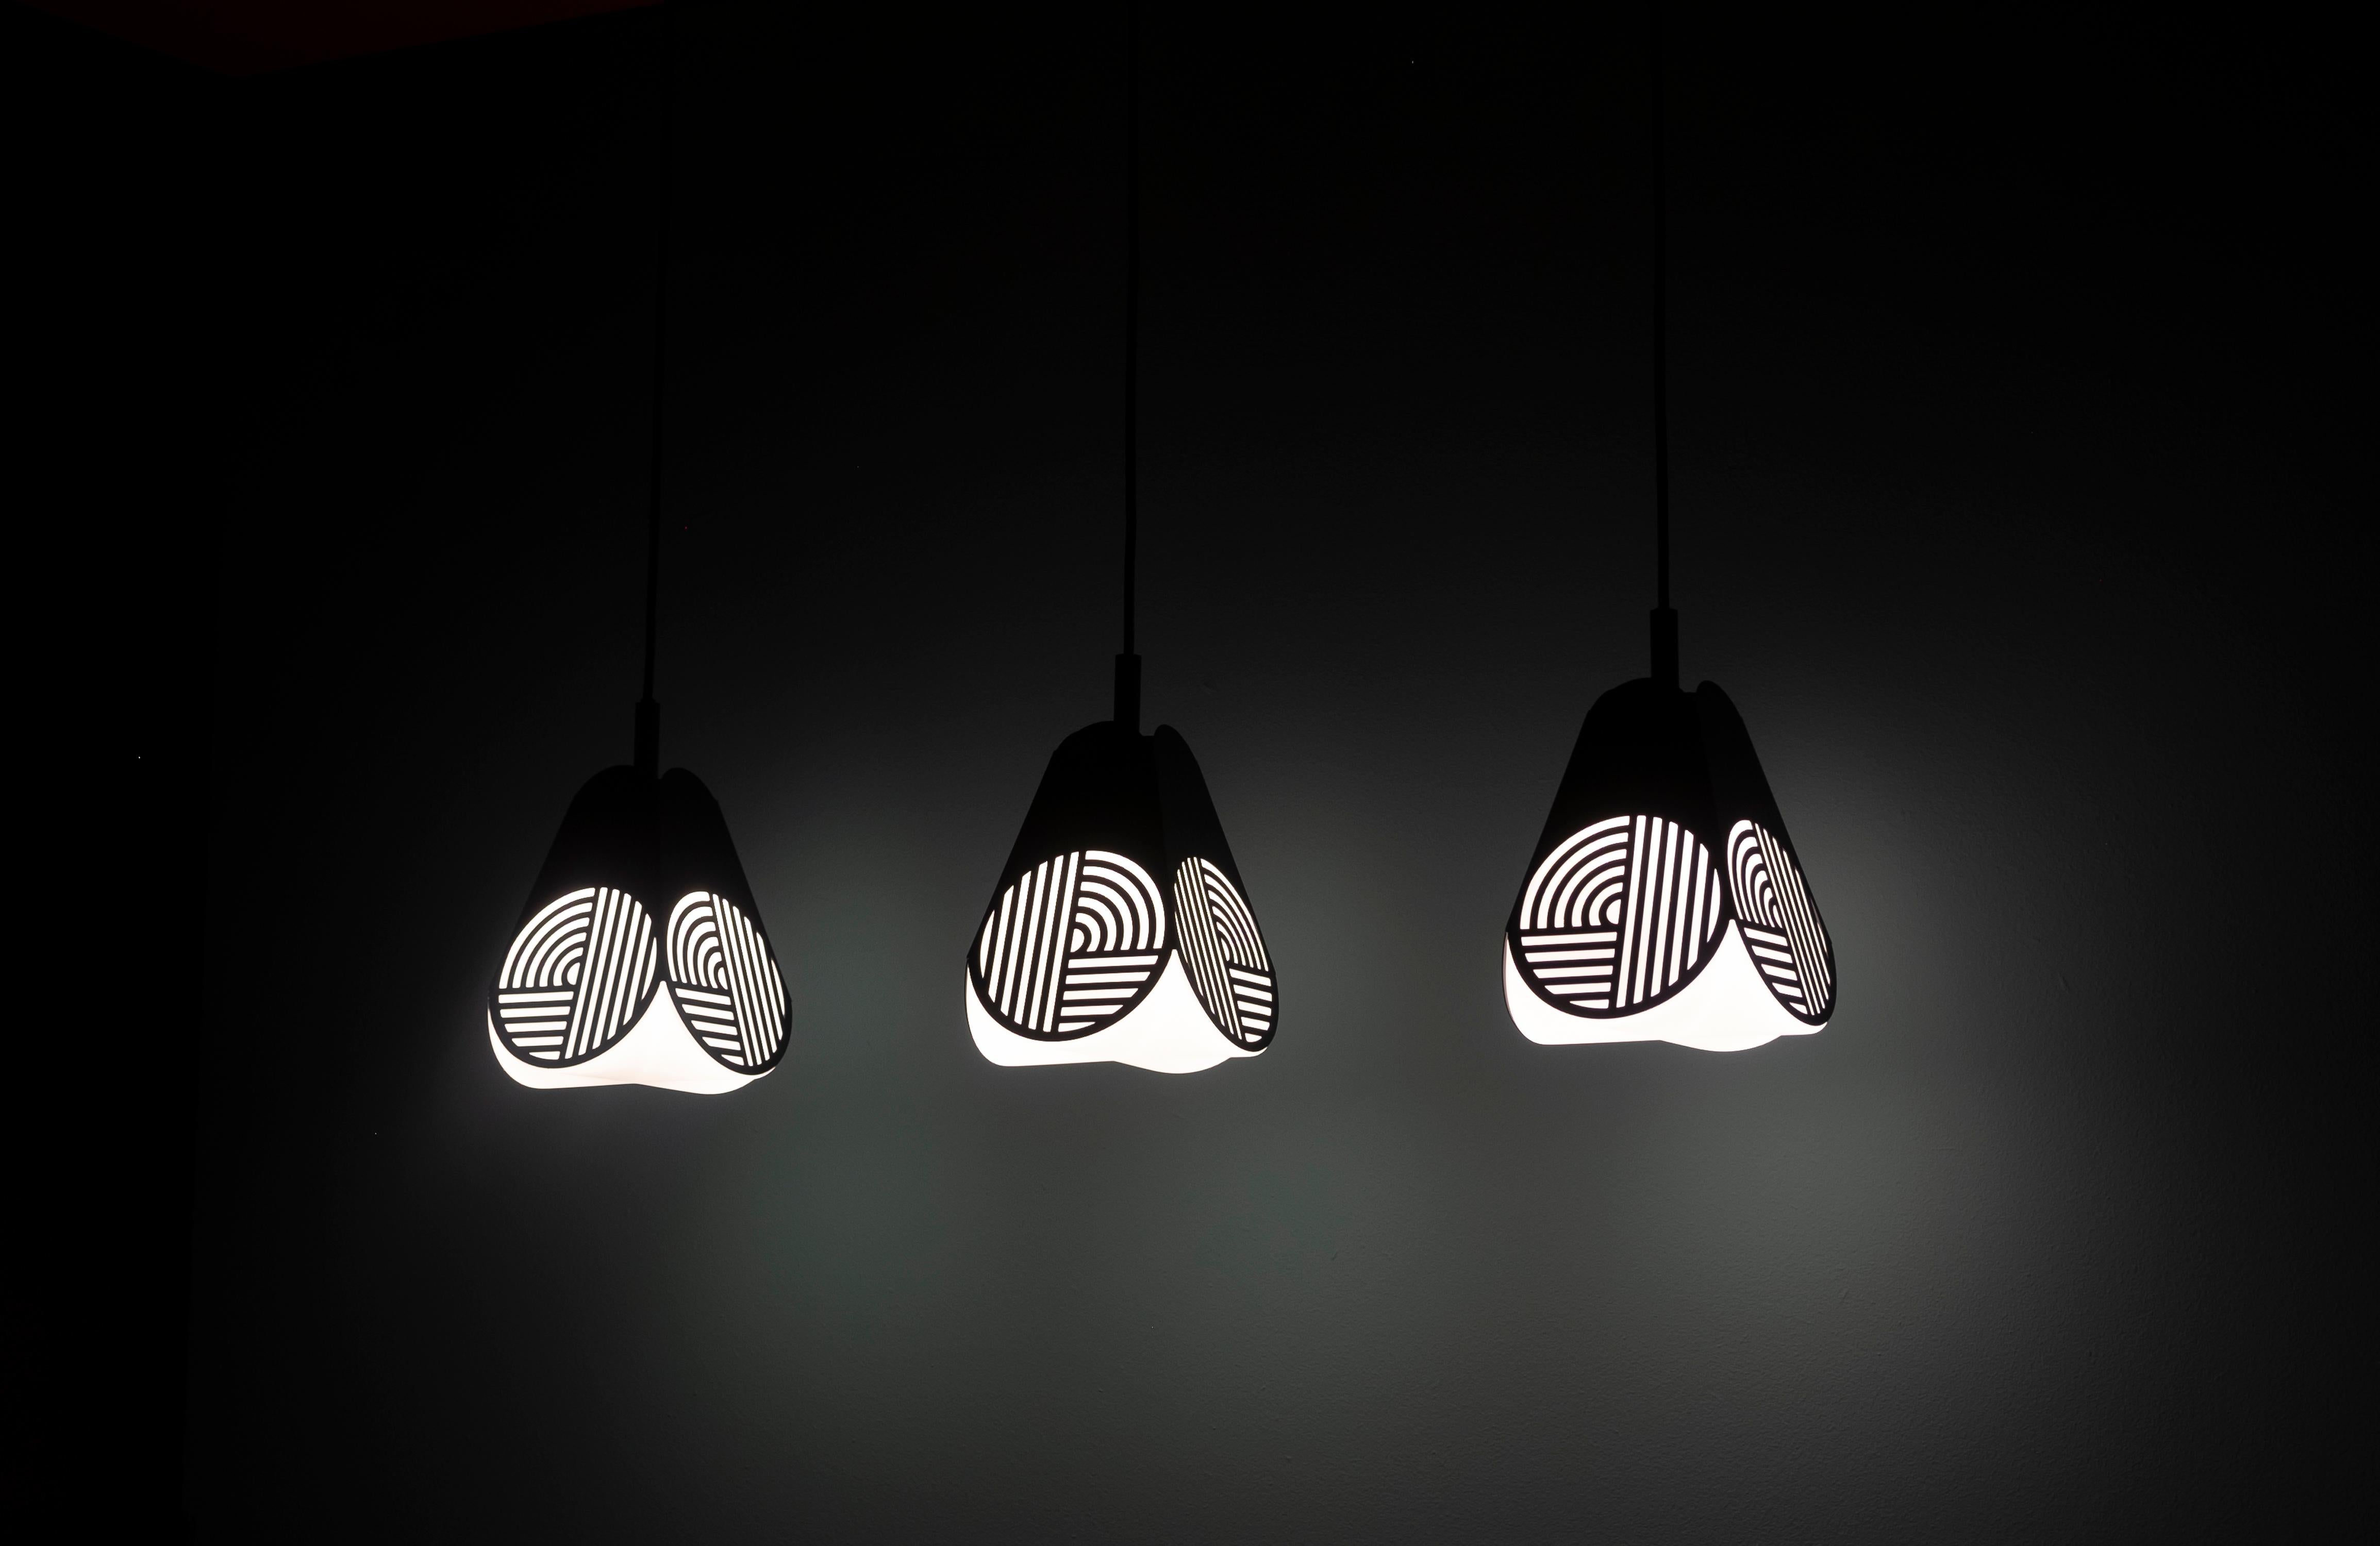 Ensemble of Notic pendant lamps by Bower Studio
Dimensions: 18 x 15.5 cm (Ø) (cord length: 300 cm)

Notic is an homage to classical architectural elements.
The graphical metal shade embraces the complex geometry of the glass and spreads the